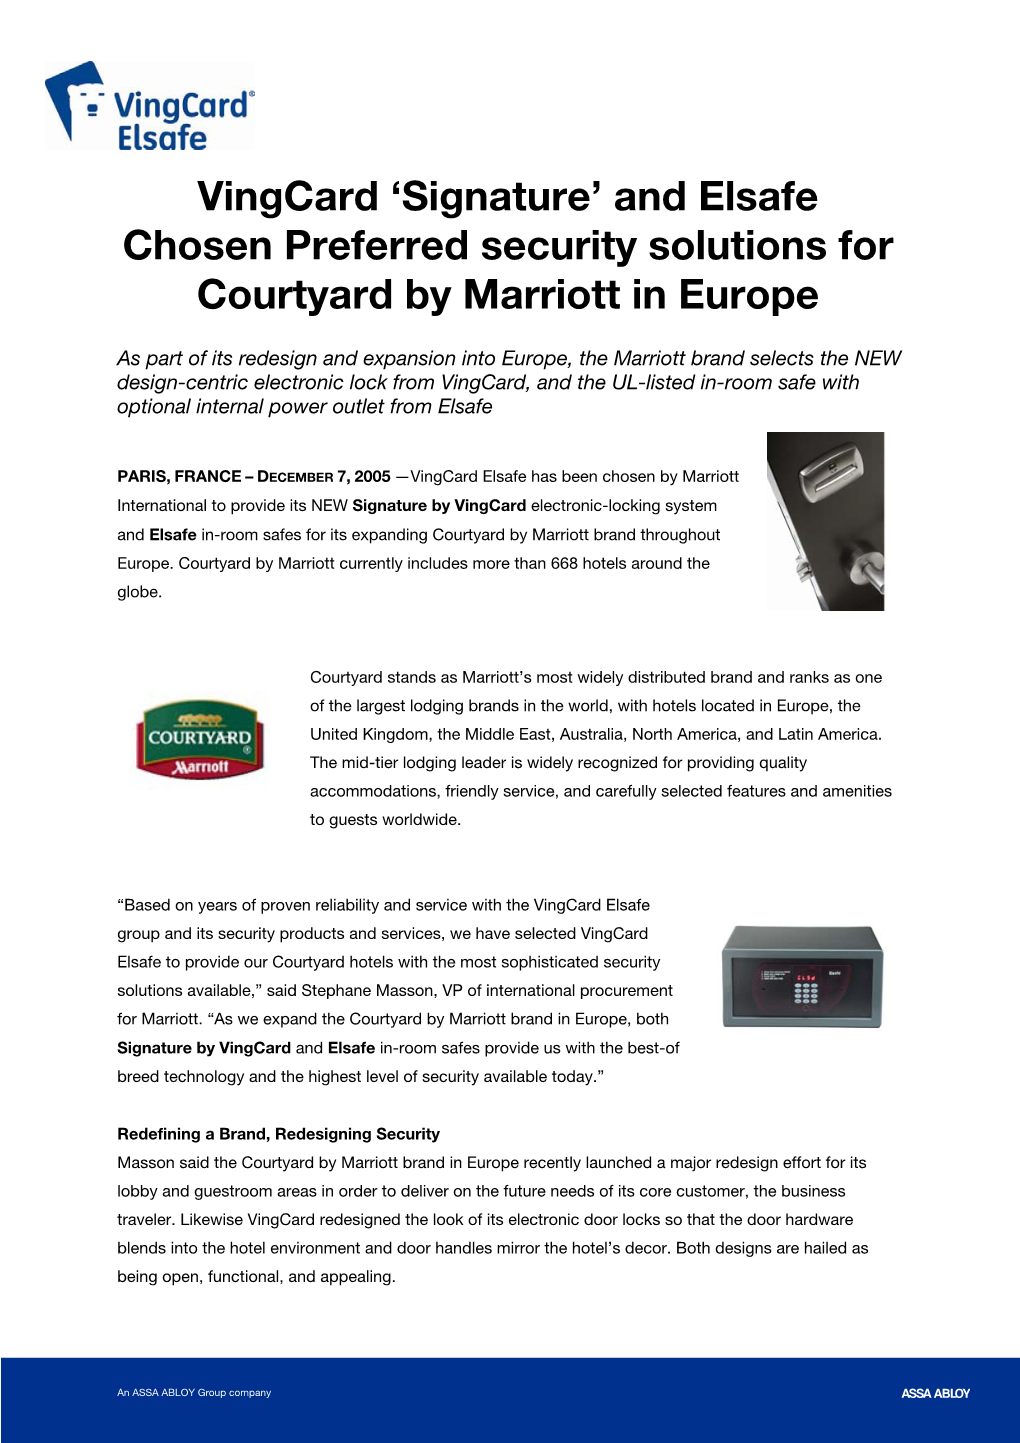 Vingcard 'Signature' and Elsafe Chosen Preferred Security Solutions